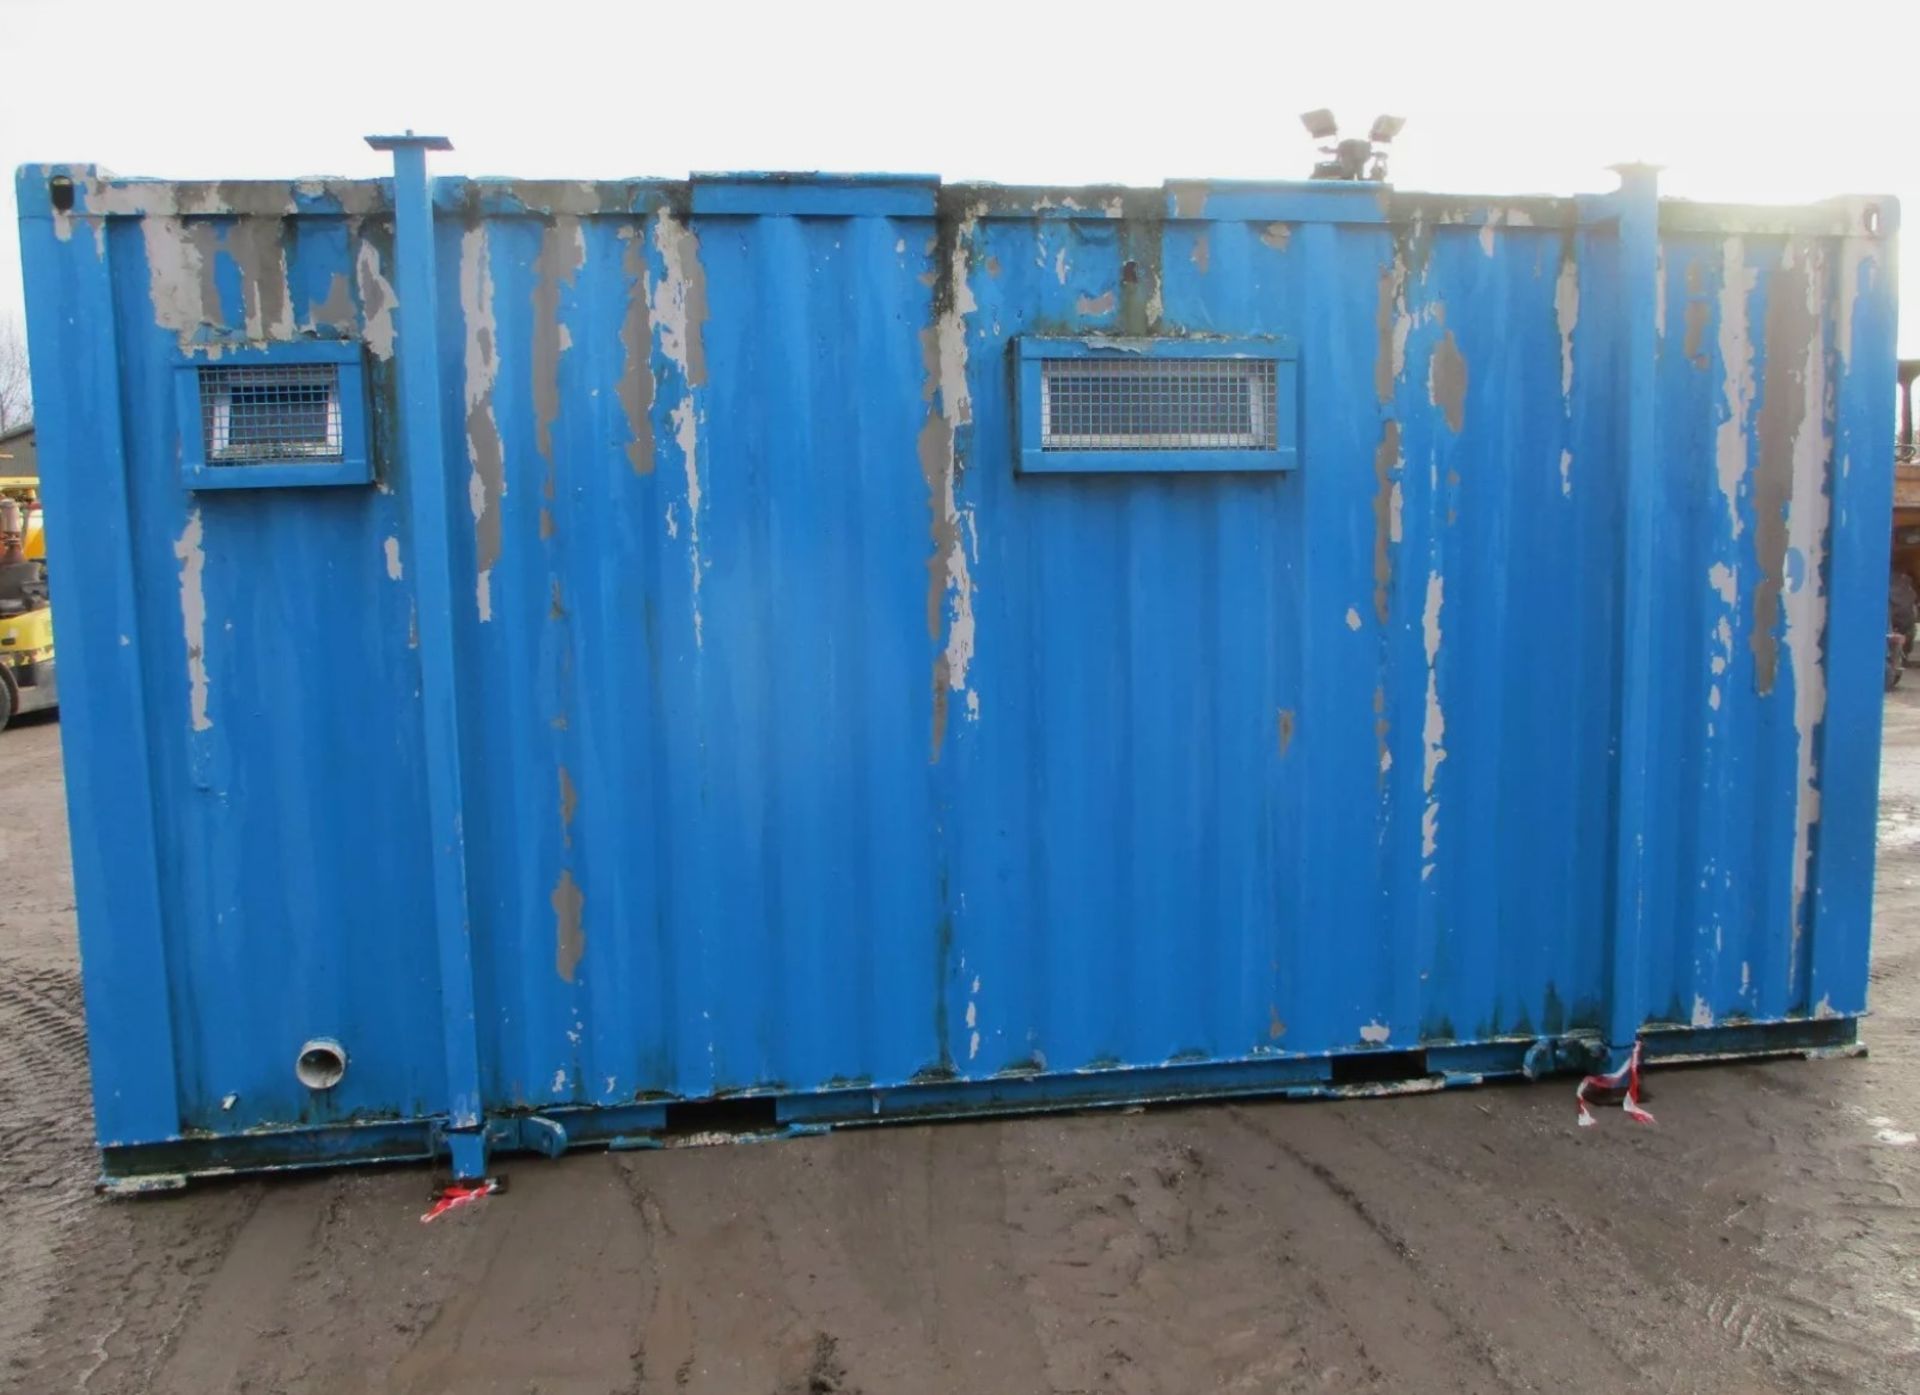 SHIPPING CONTAINER TOILET BLOCK: YOUR COMPLETE PORTABLE SANITATION SOLUTION - Image 2 of 11